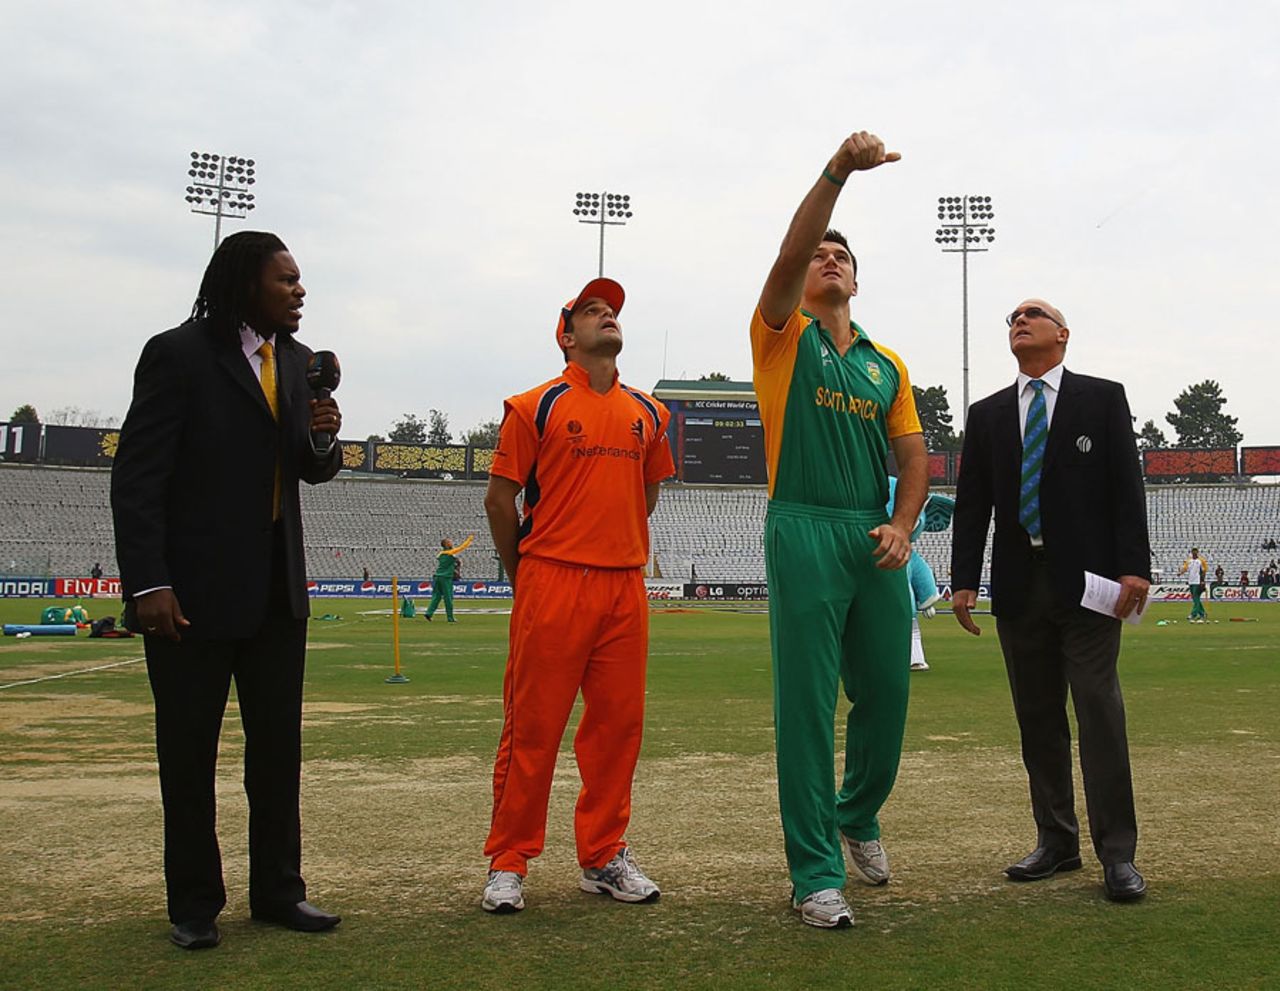 Peter Borren called right and decided to field in Mohali, Netherlands v South Africa, World Cup 2011, Mohali, March 3, 2011